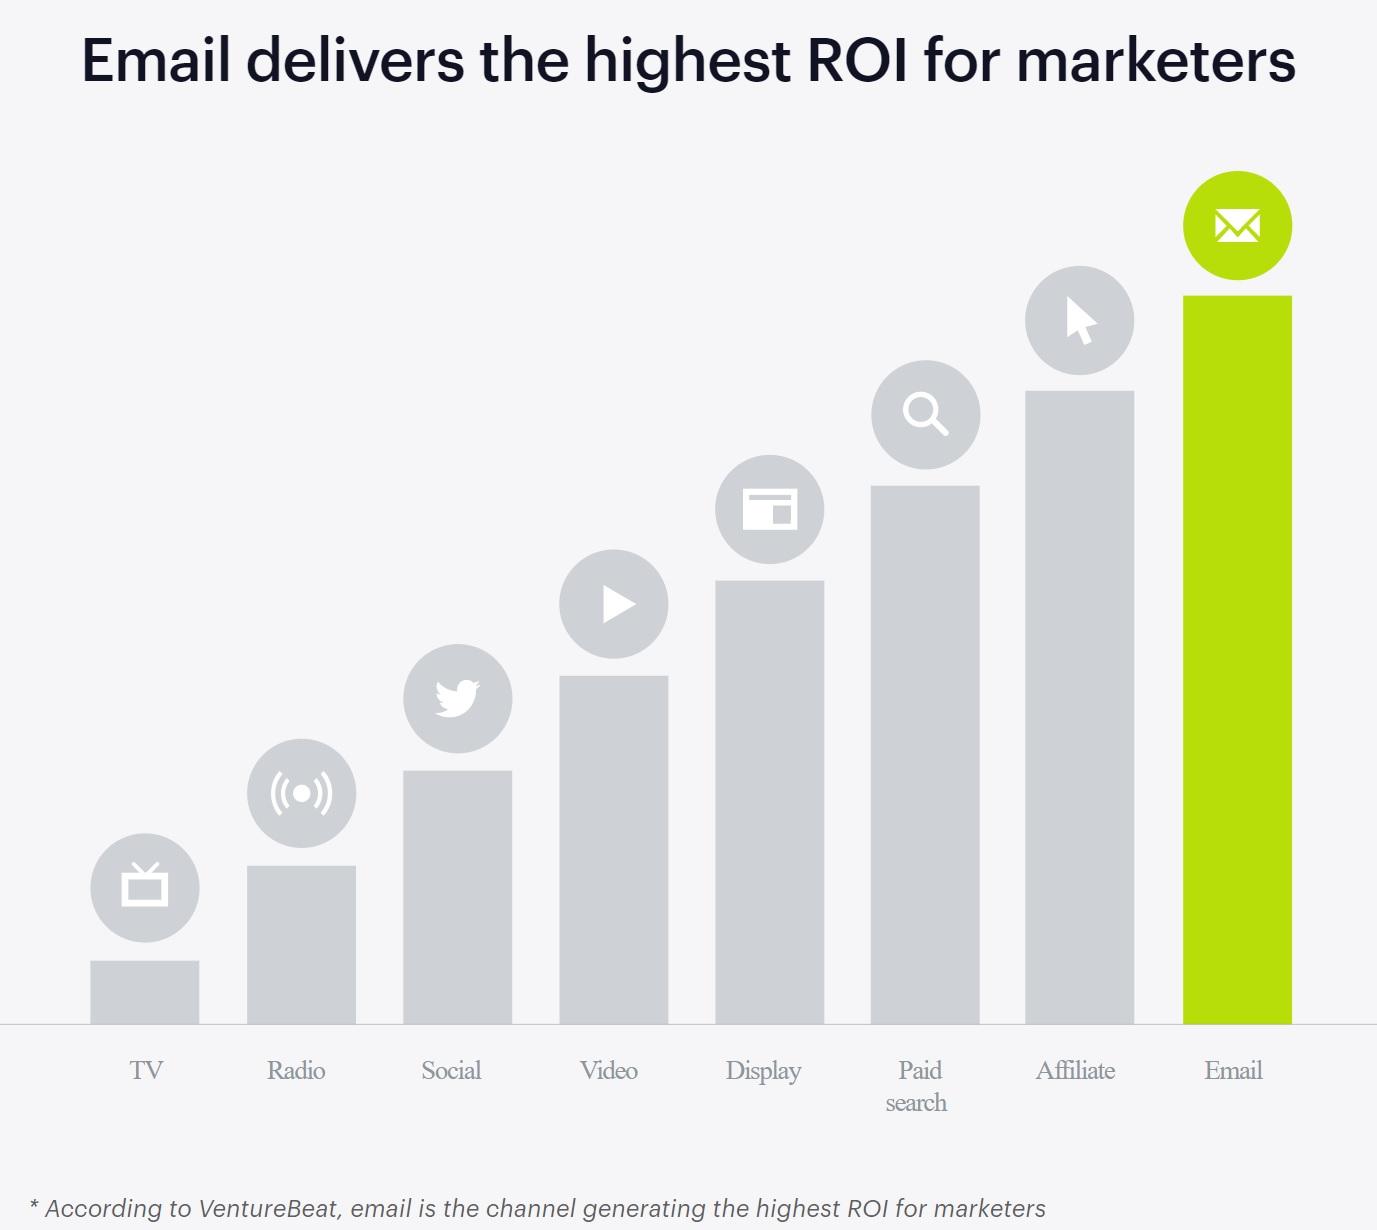 Email marketing delivers the highest ROI